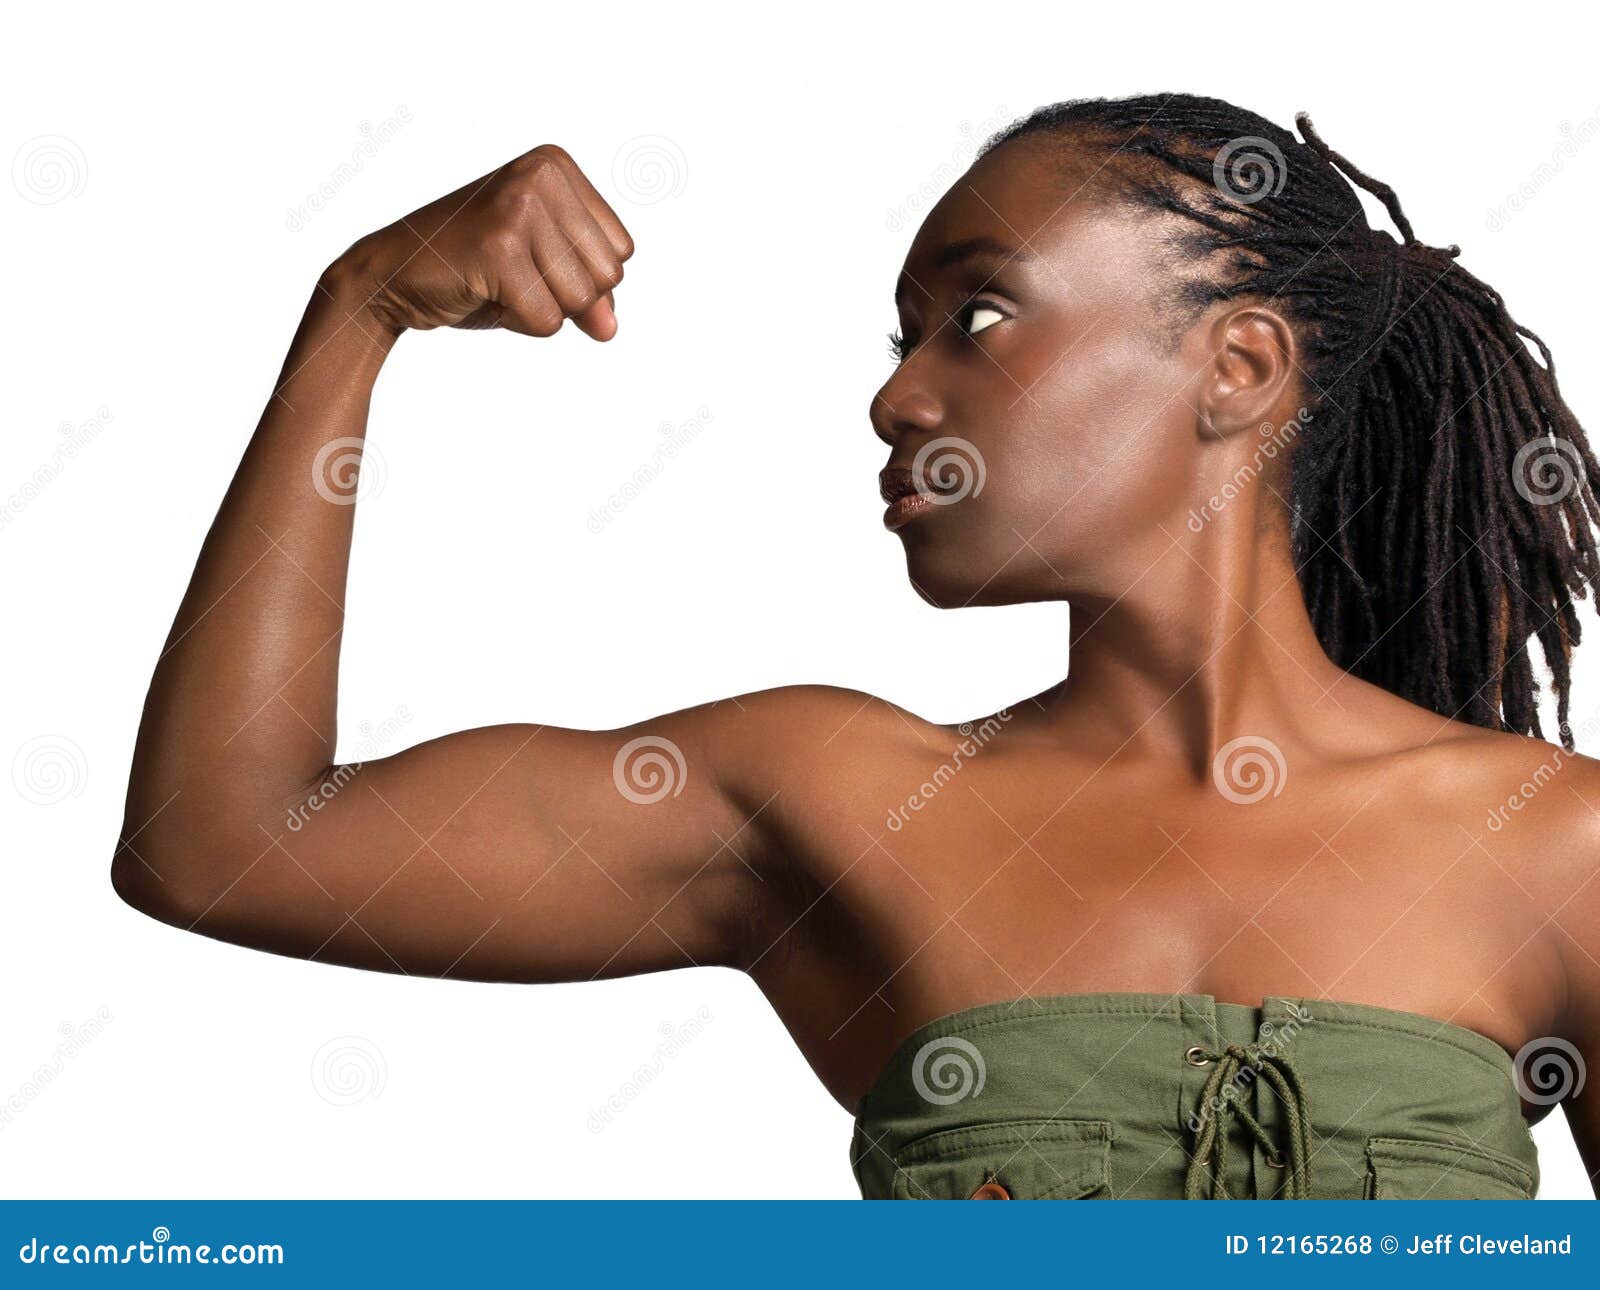 https://thumbs.dreamstime.com/z/young-black-woman-profile-showing-biceps-12165268.jpg